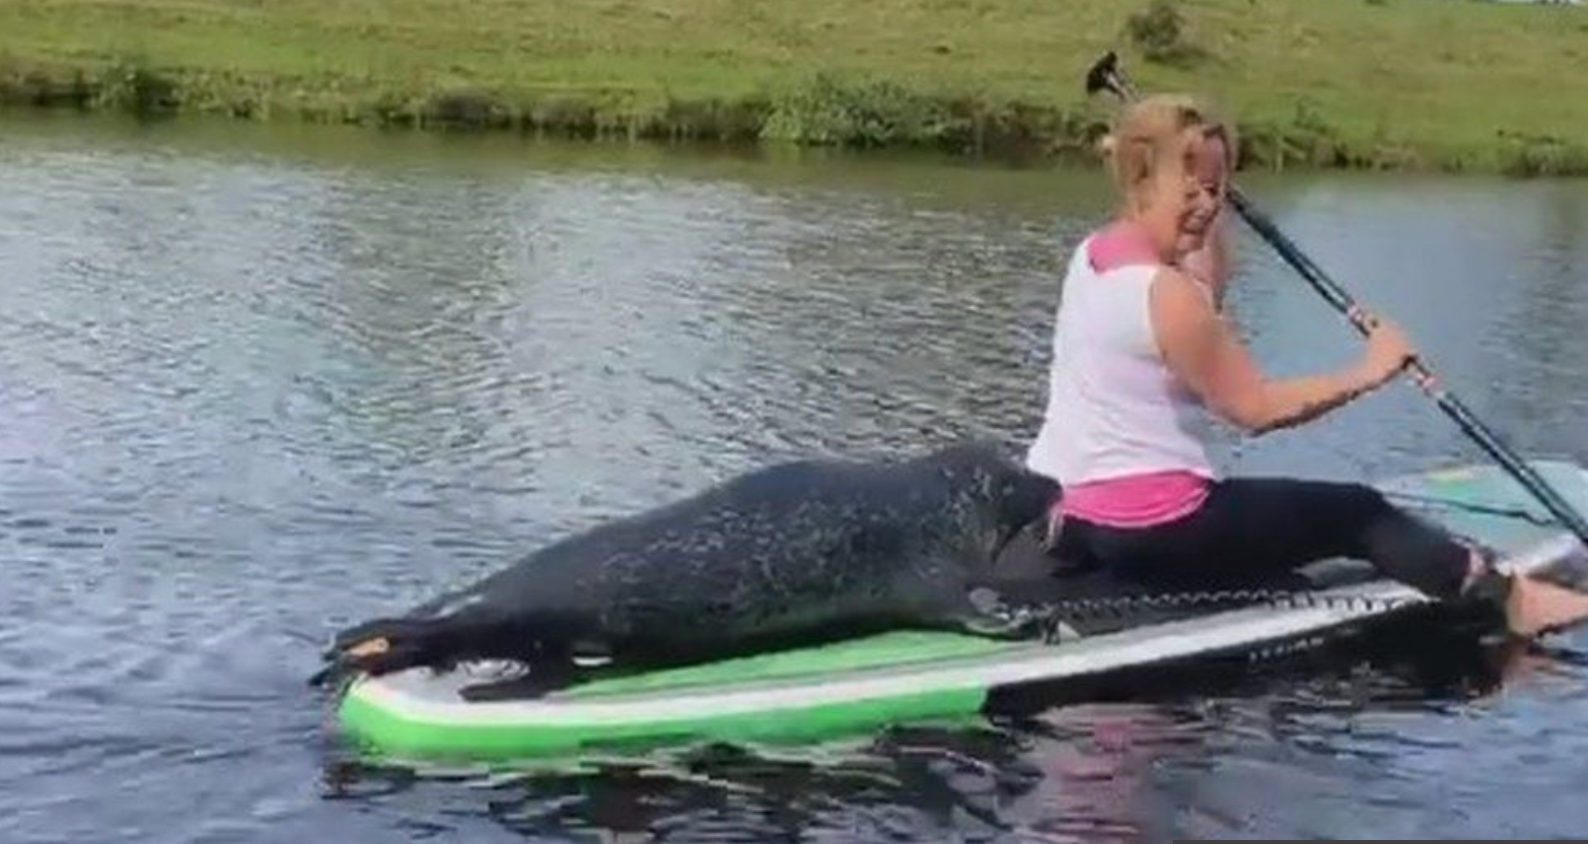 Dandy disrupted a lesson by climbing aboard a paddleboard